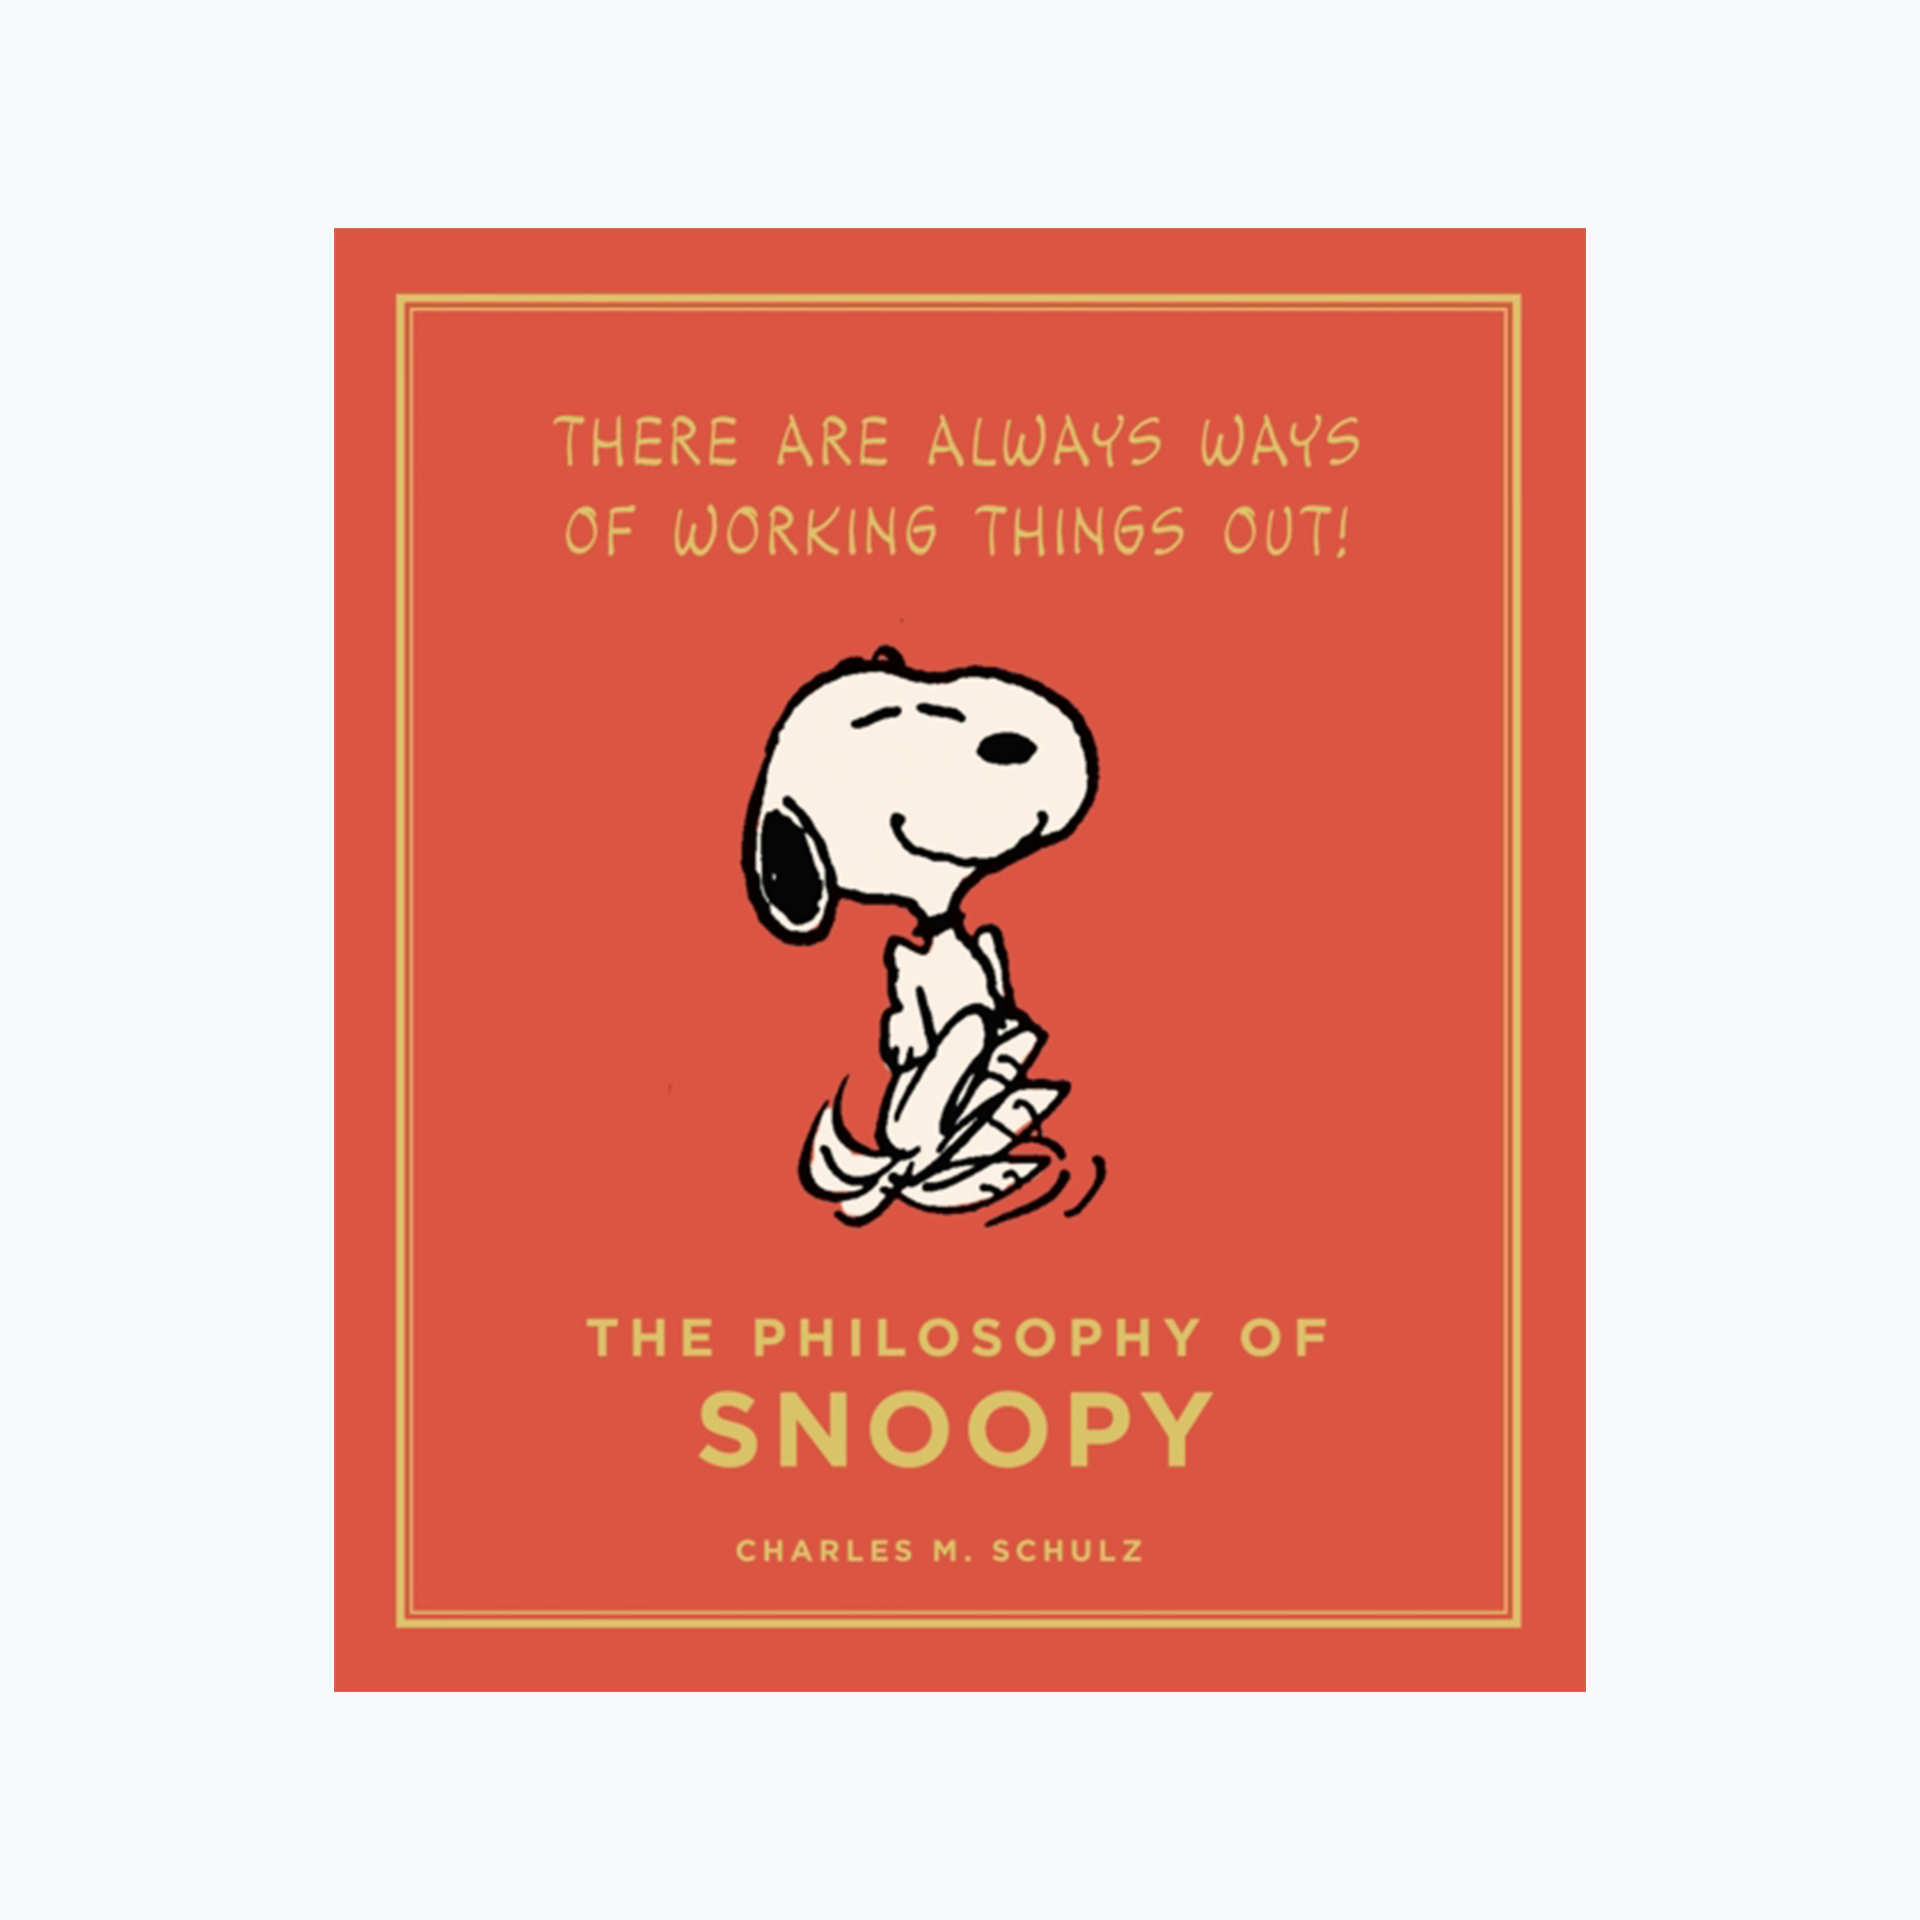 Peanuts - The Philosophy of Snoopy